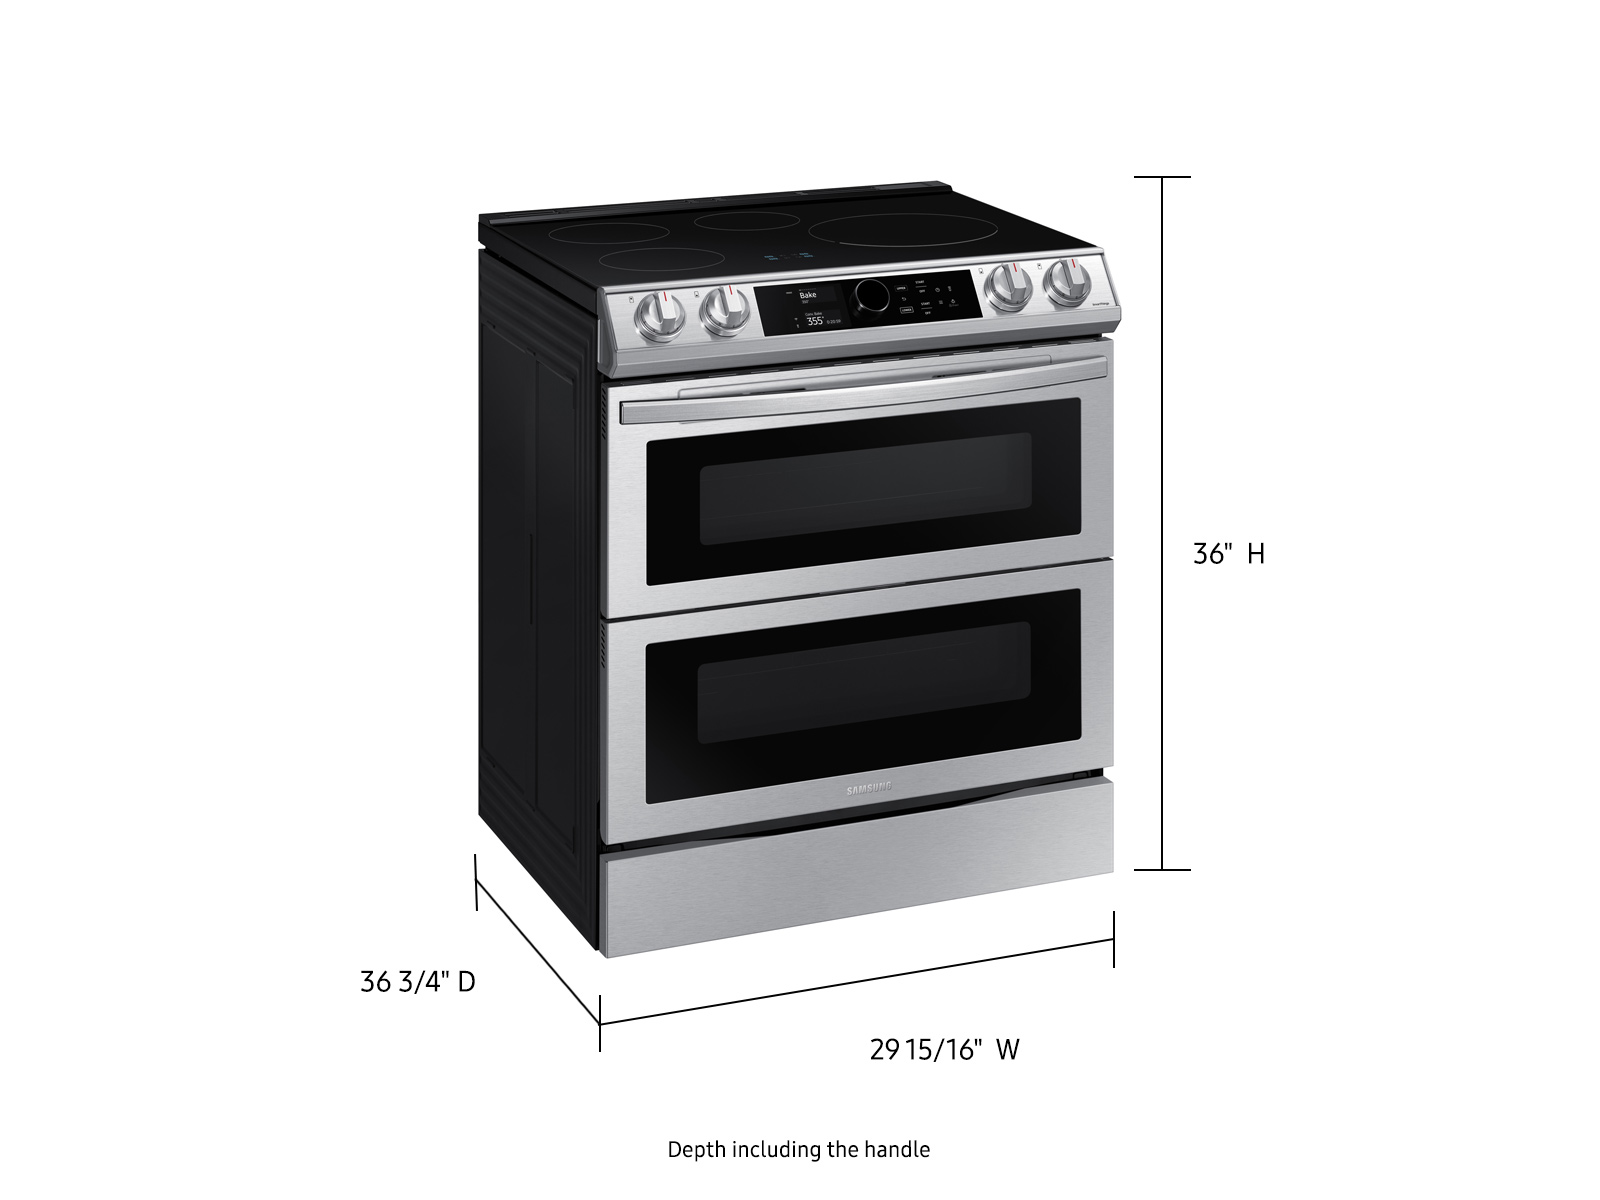 Reviews for Samsung 30 in. 6.3 cu. ft. Flex Duo Slide-In Electric Range  with Smart Dial and Air Fry in Fingerprint Resistant Stainless Steel